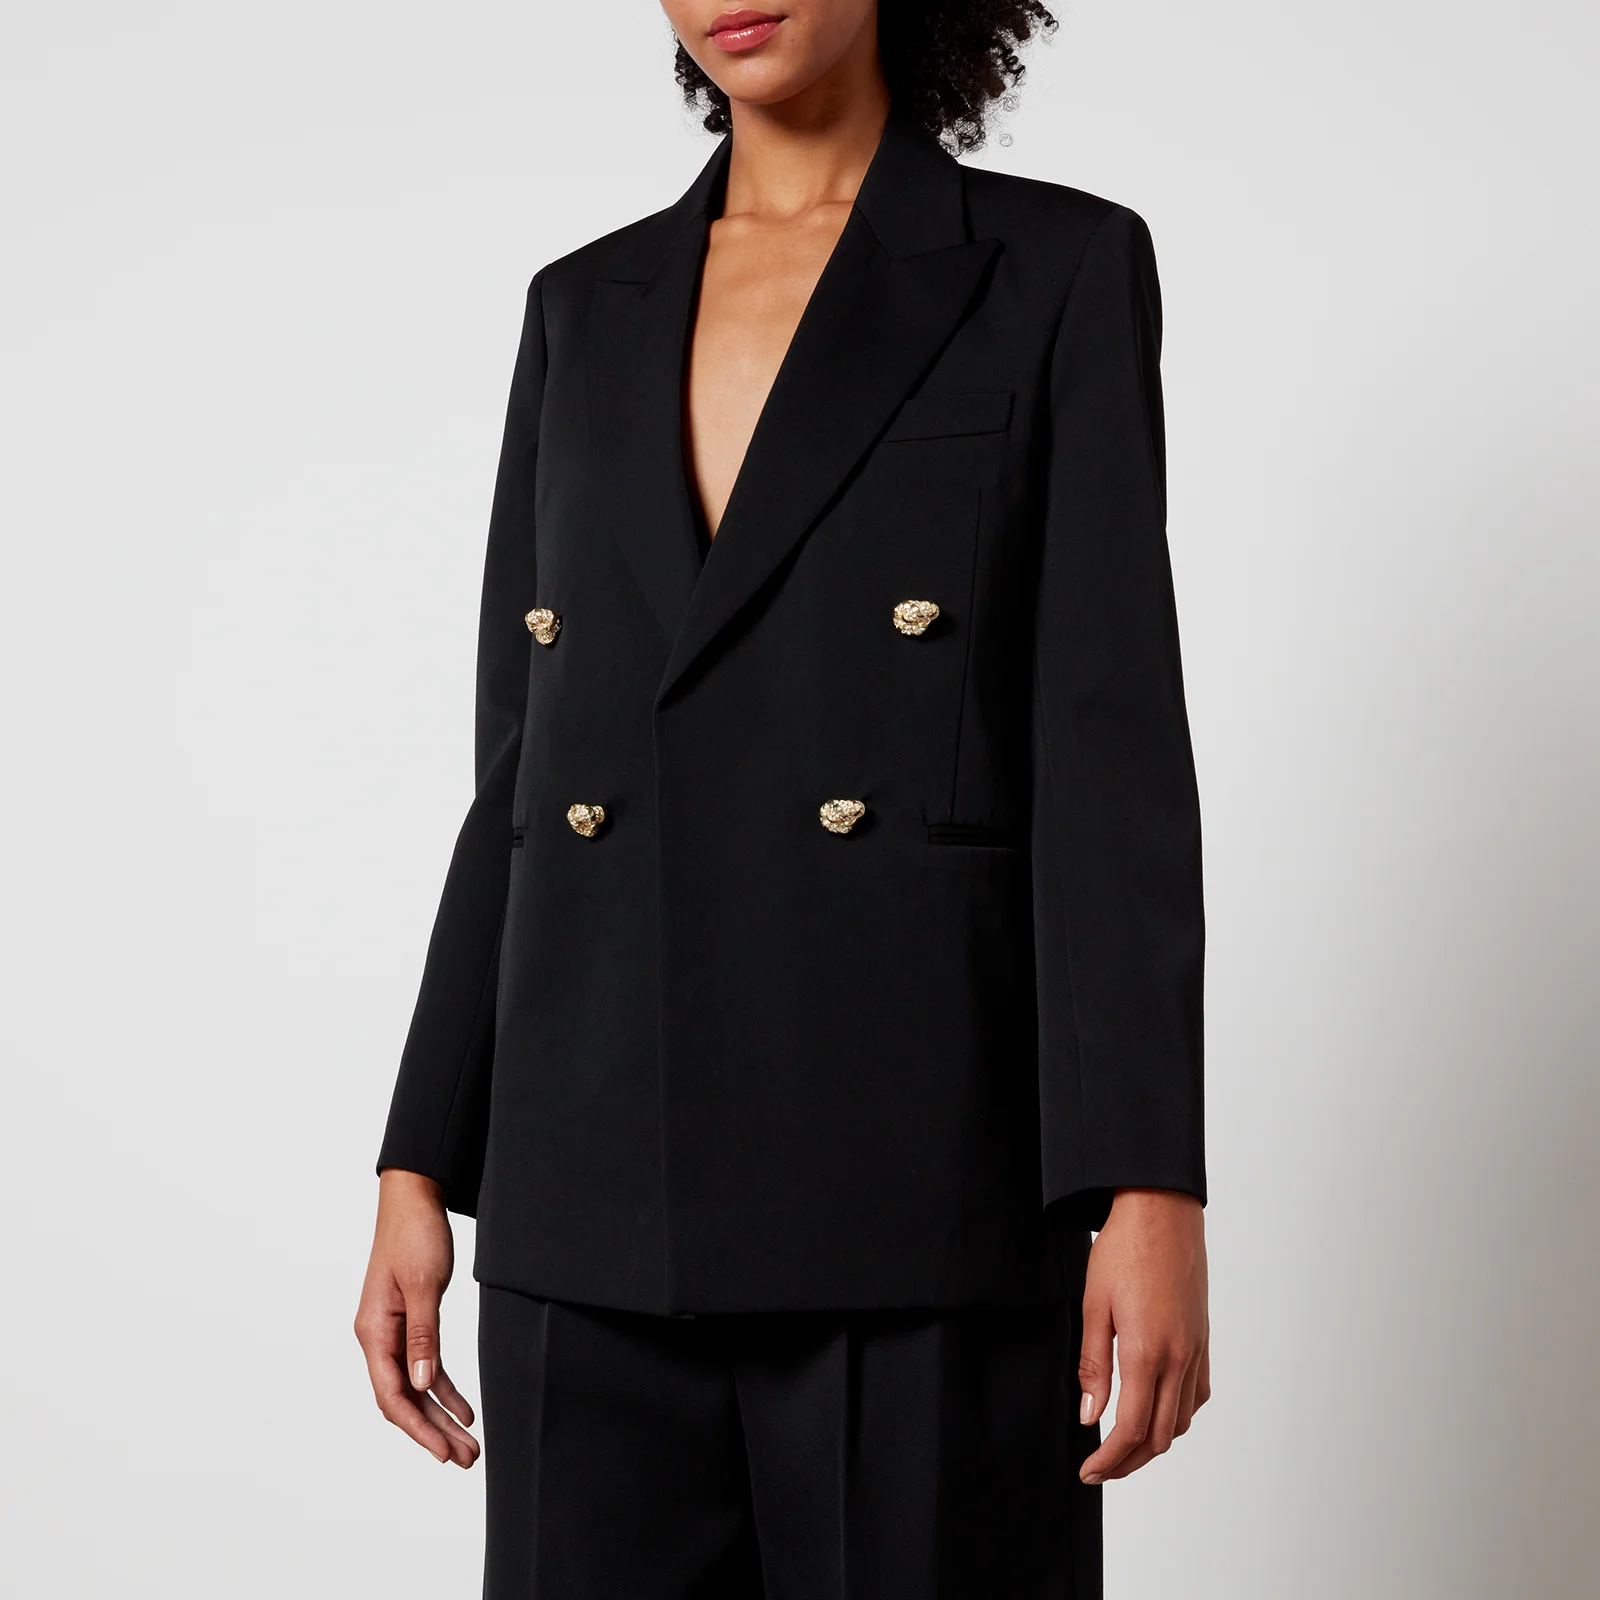 Lanvin Wool Double-Breasted Blazer Image 1